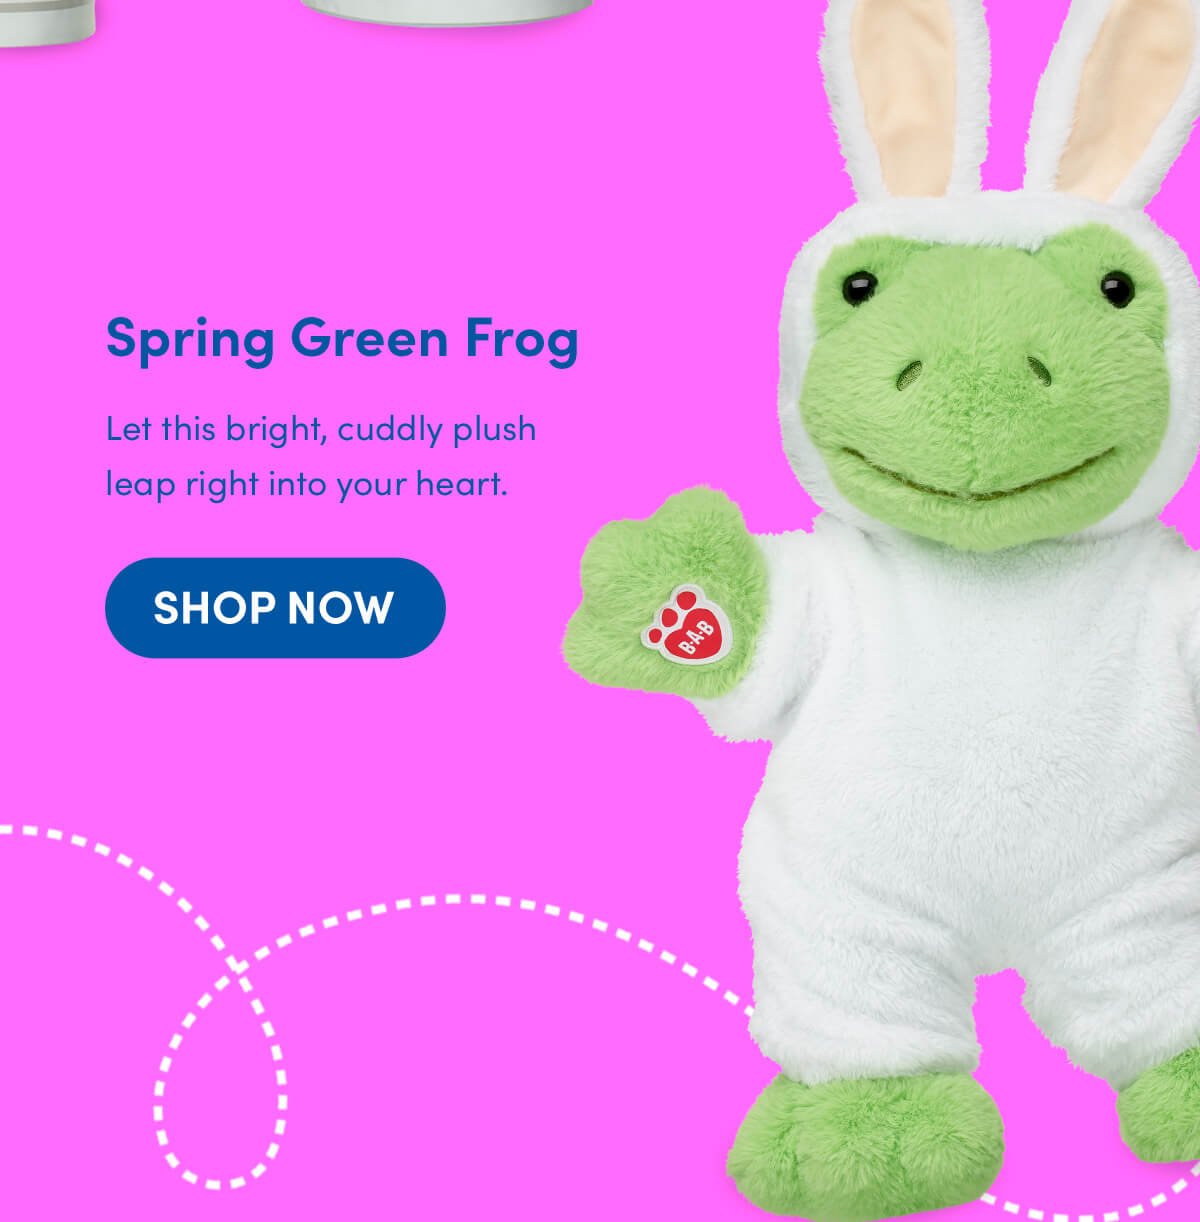 Spring Green Frog - Let this bright, cuddly plush leap right into your heart. - SHOP NOW